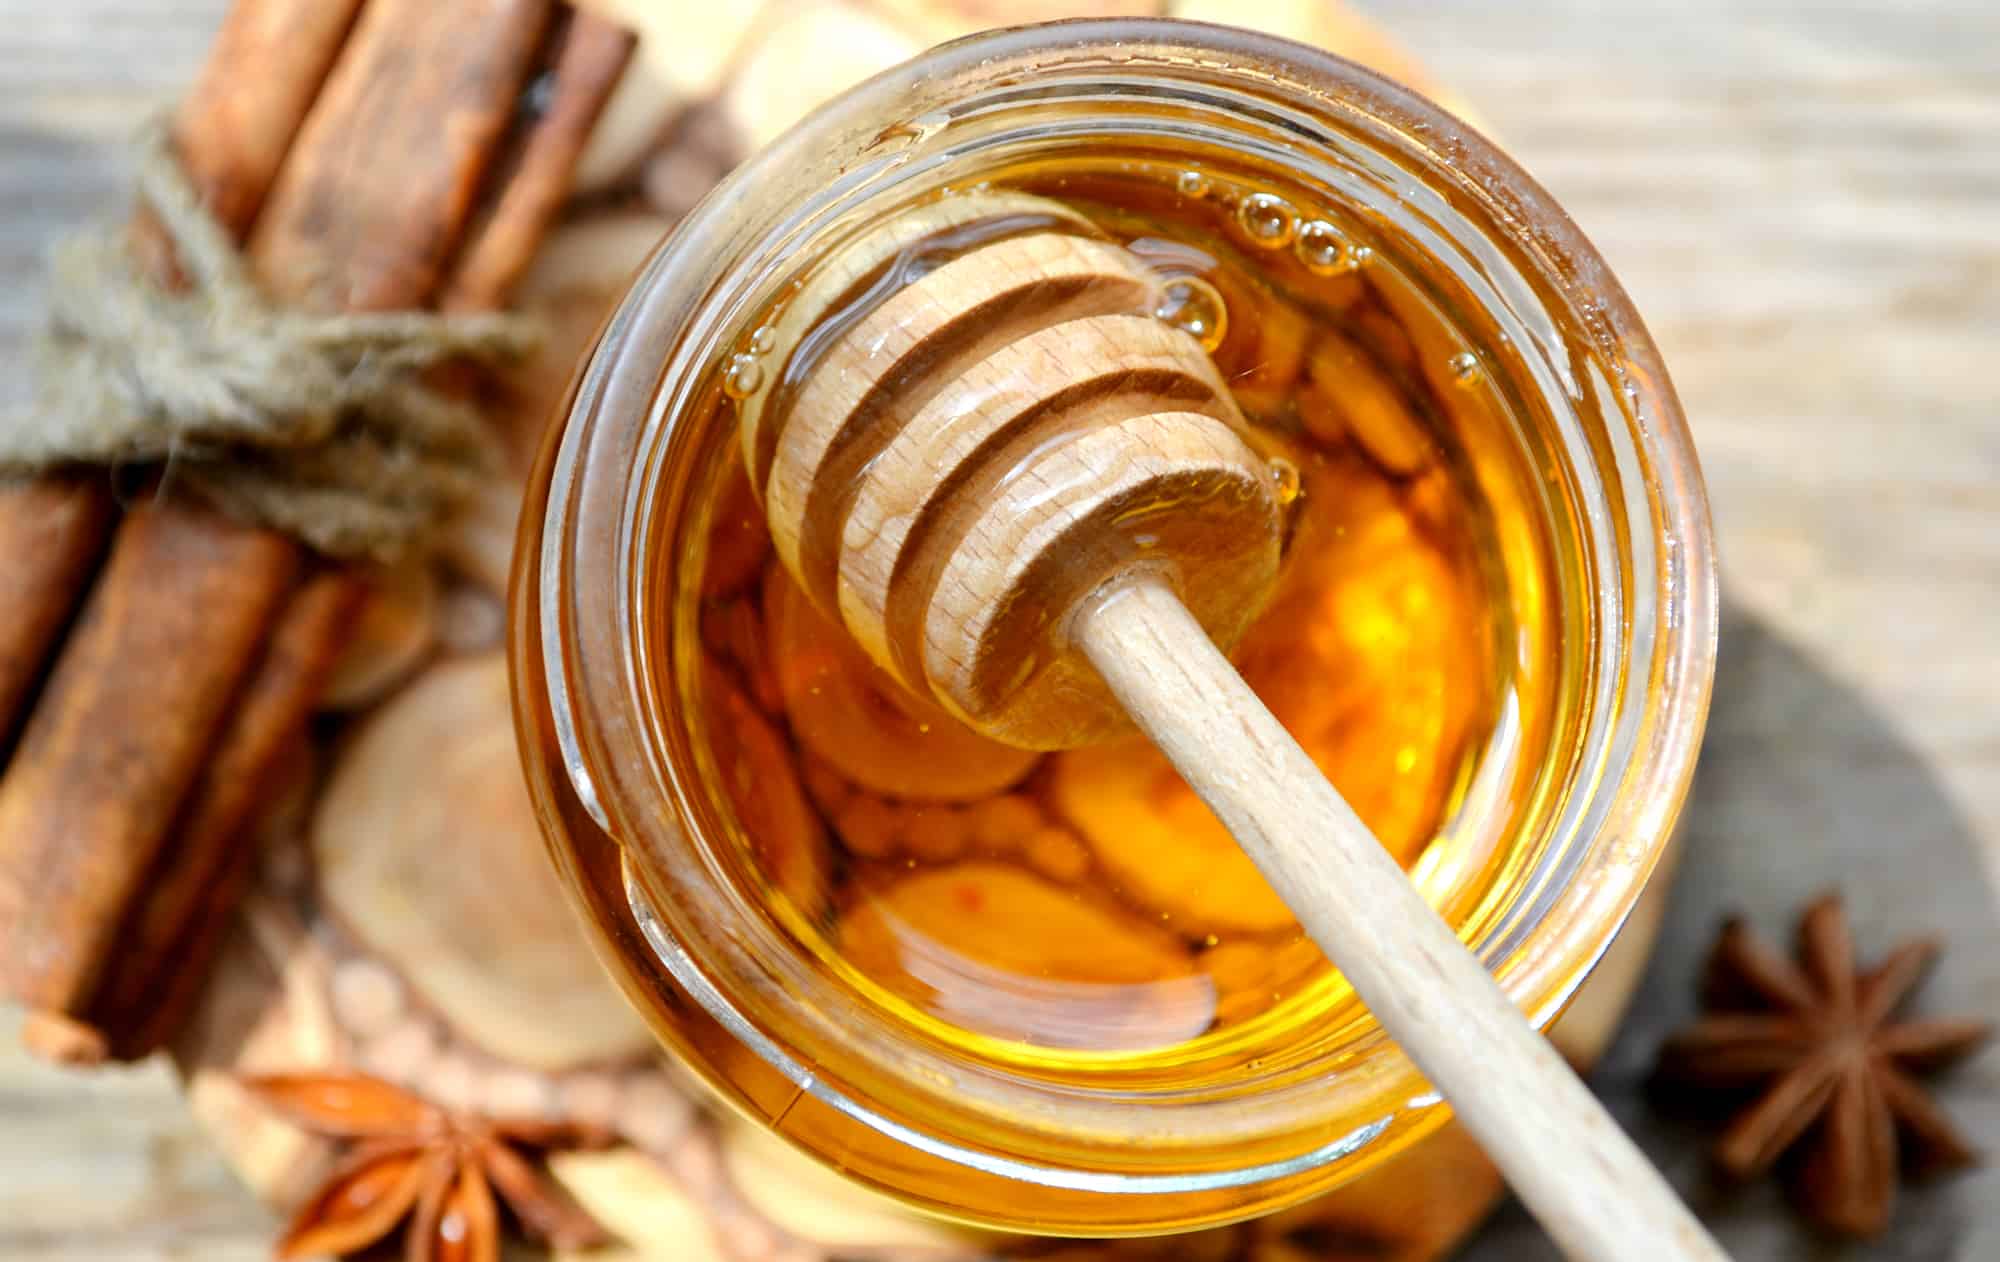 Honey in a glass jar on a wood table with cinnamon sticks.